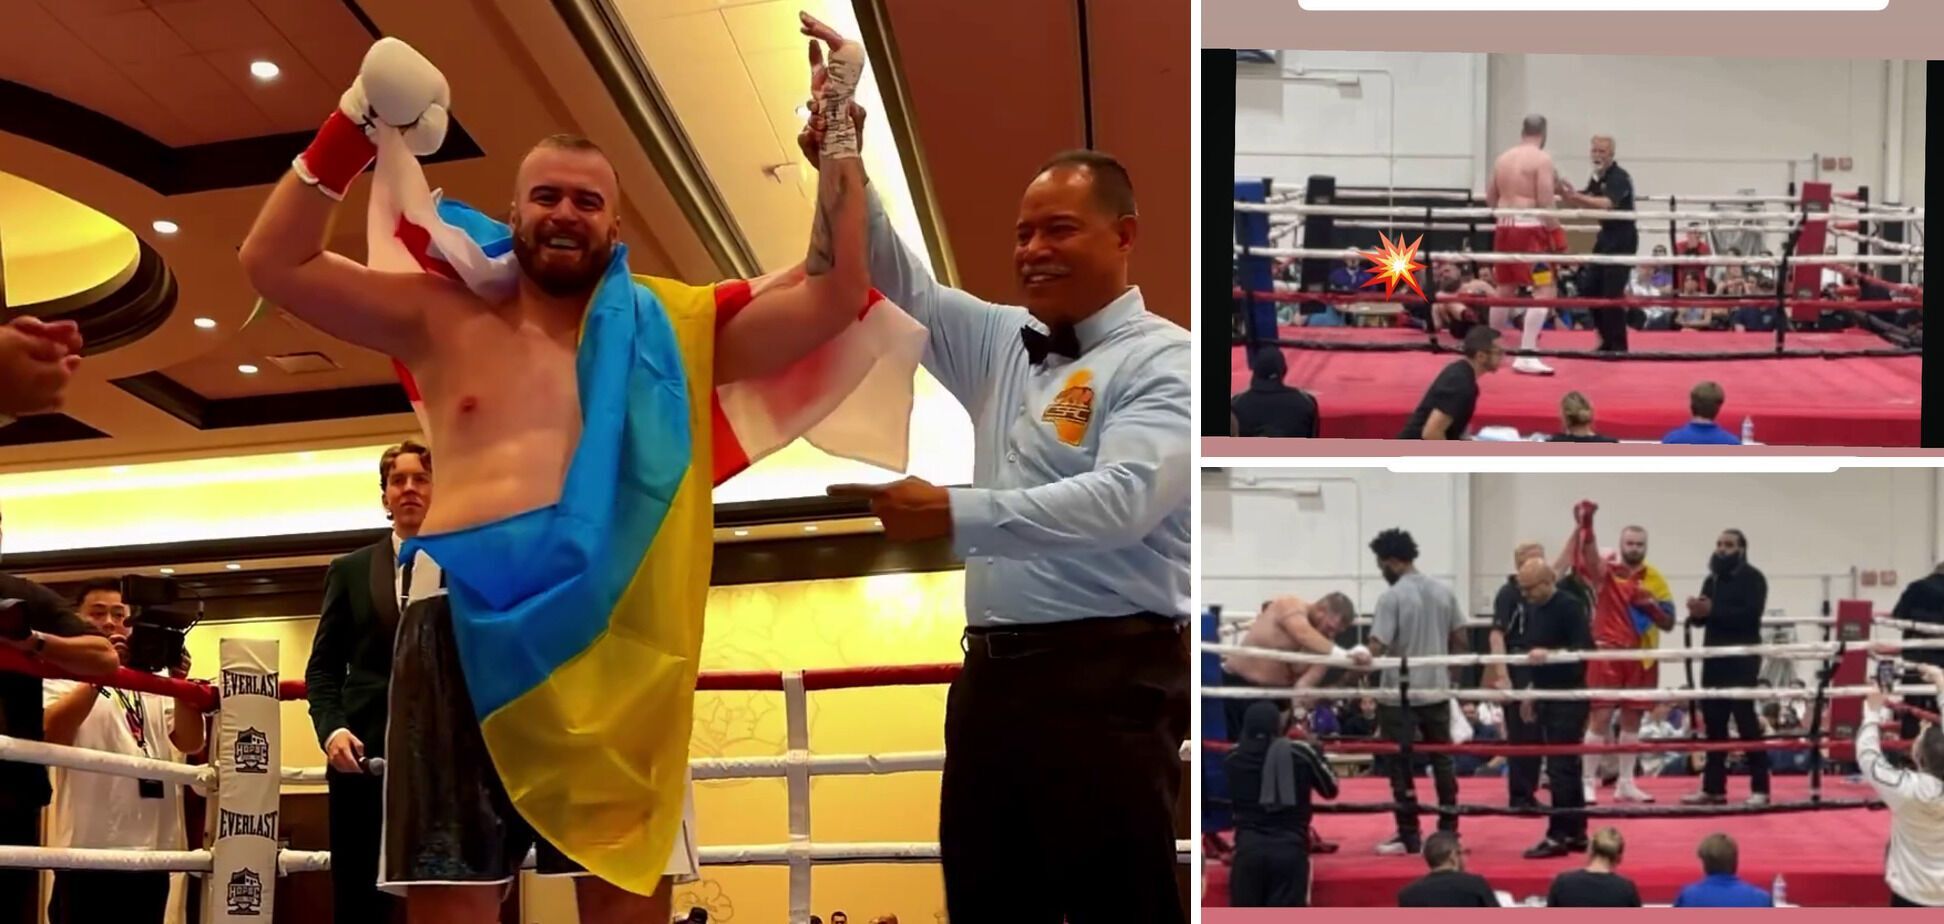 The former world boxing champion won the title by knockout with the first punch. Video